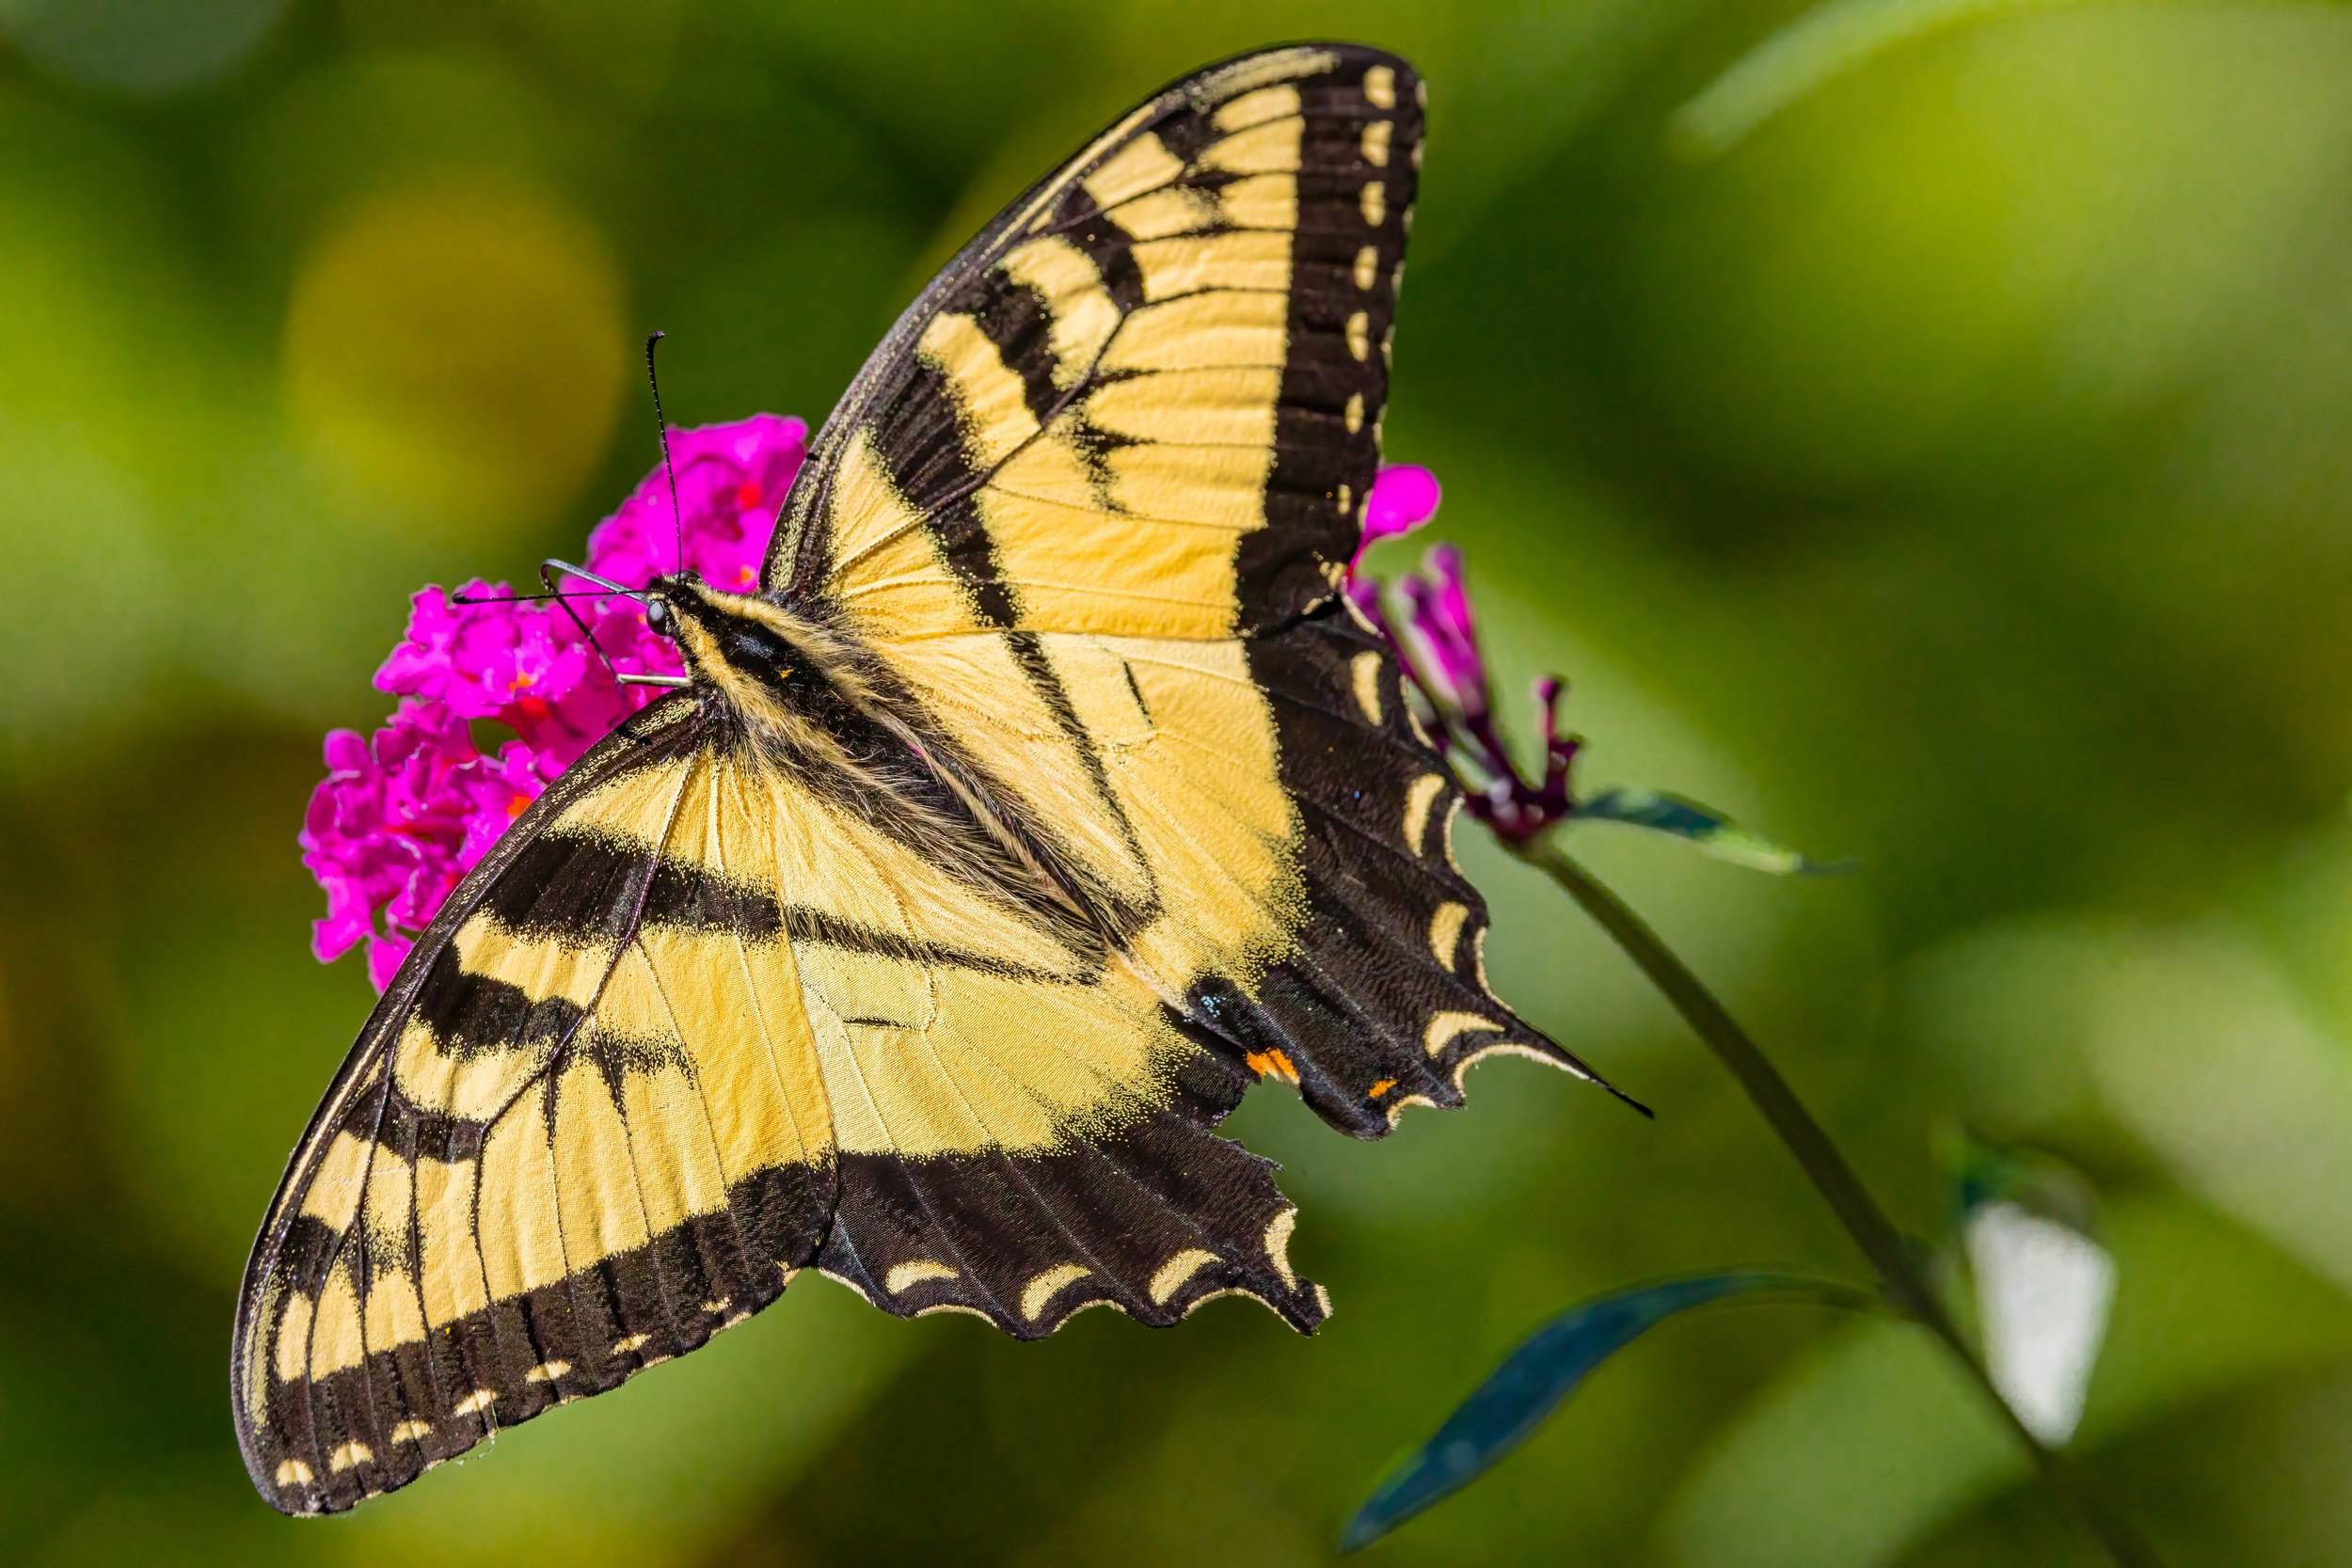 Swallowtail. Linville, N.C. (Aug. 2022)